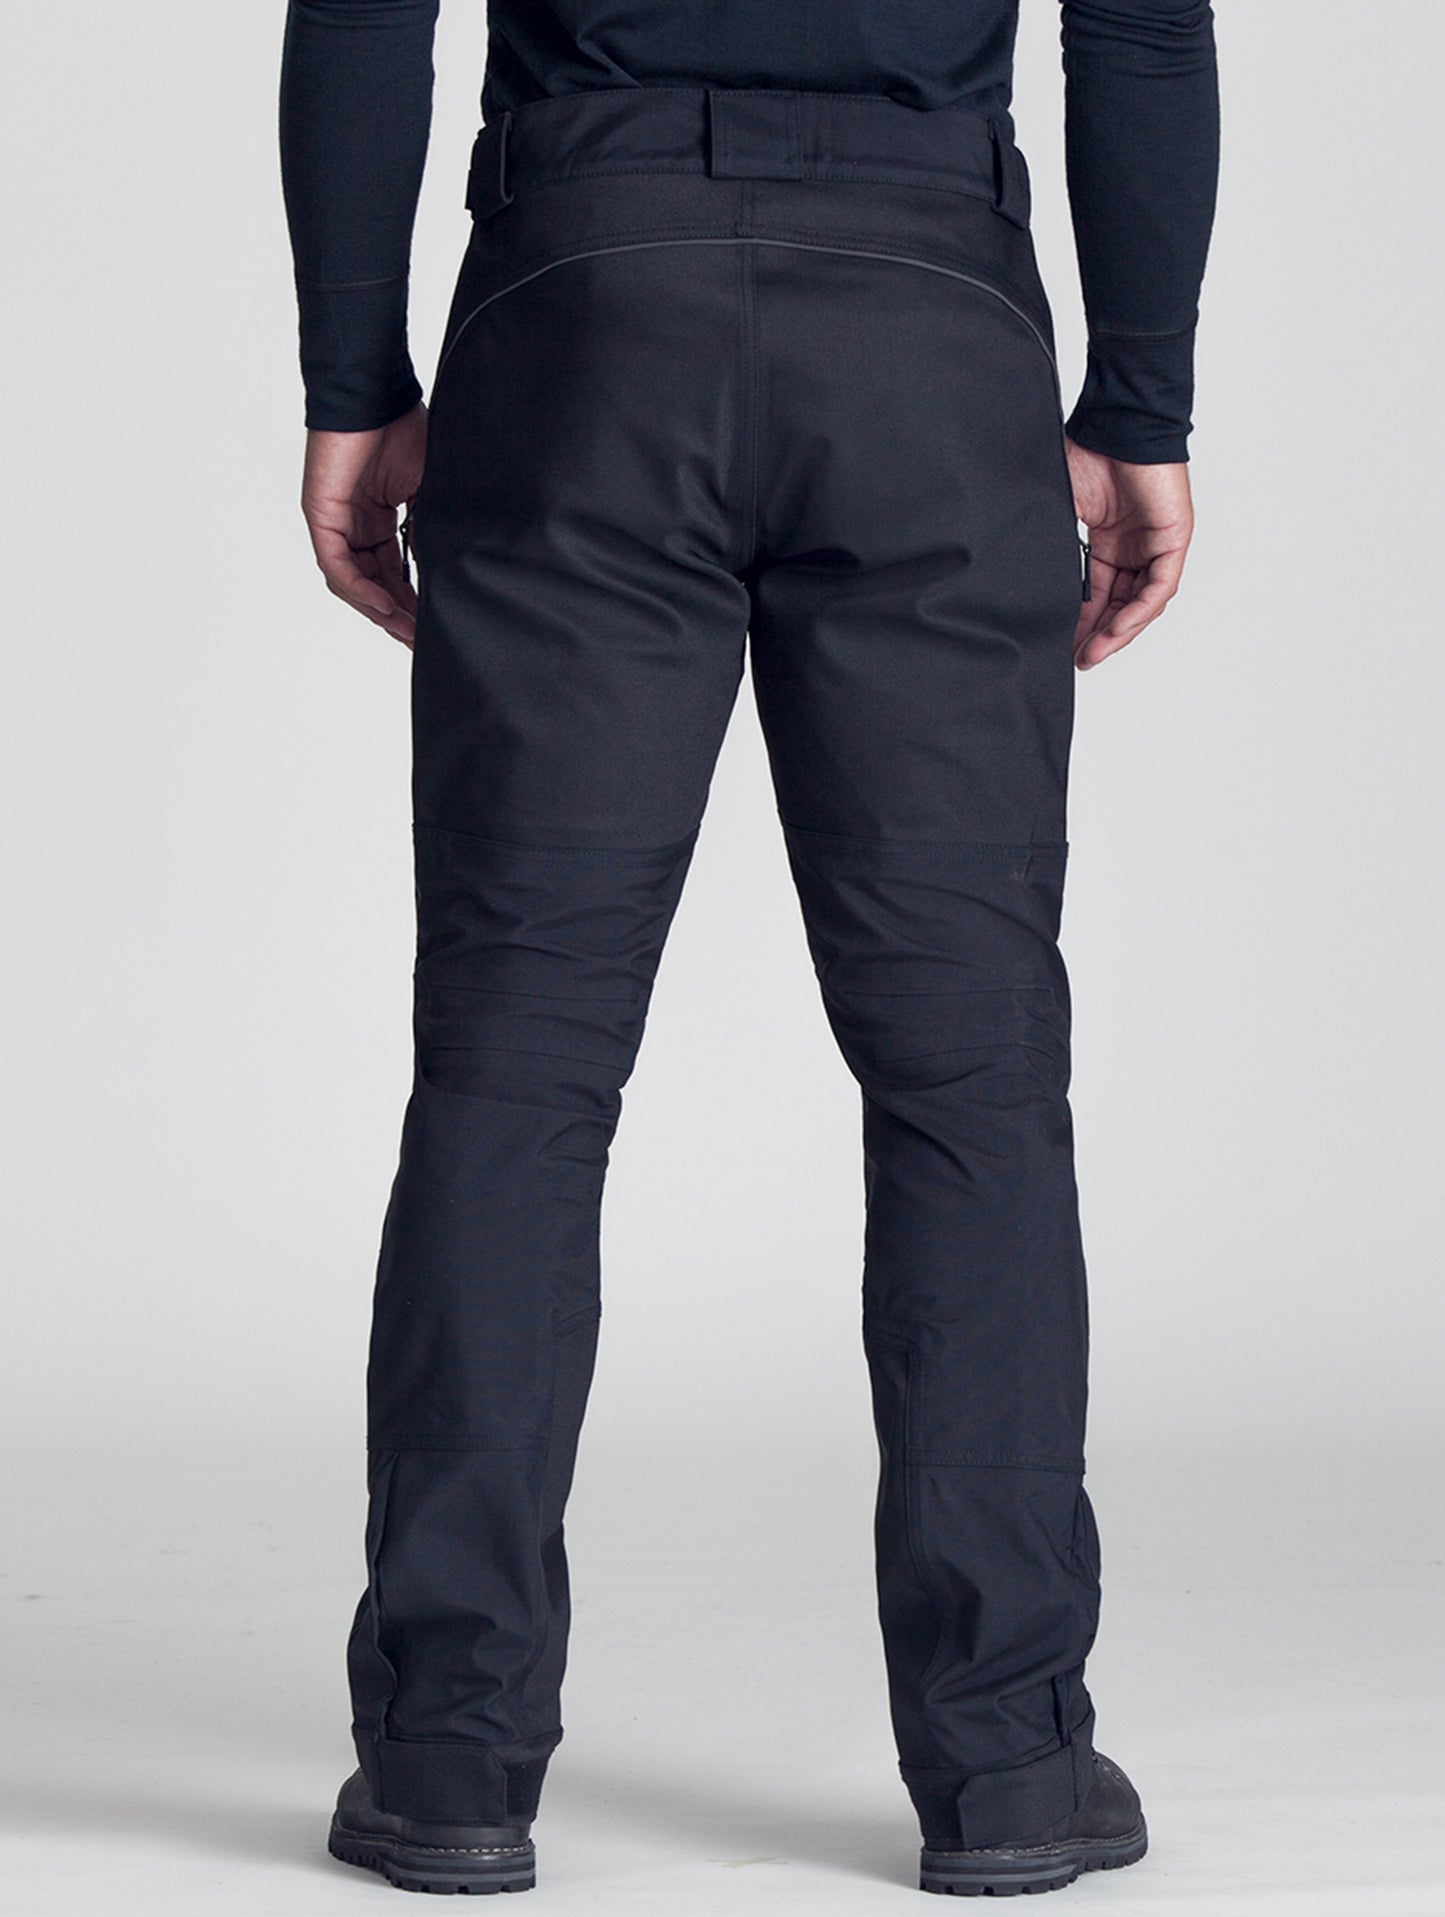 Expedition Motorcycle Pant - Jet Black